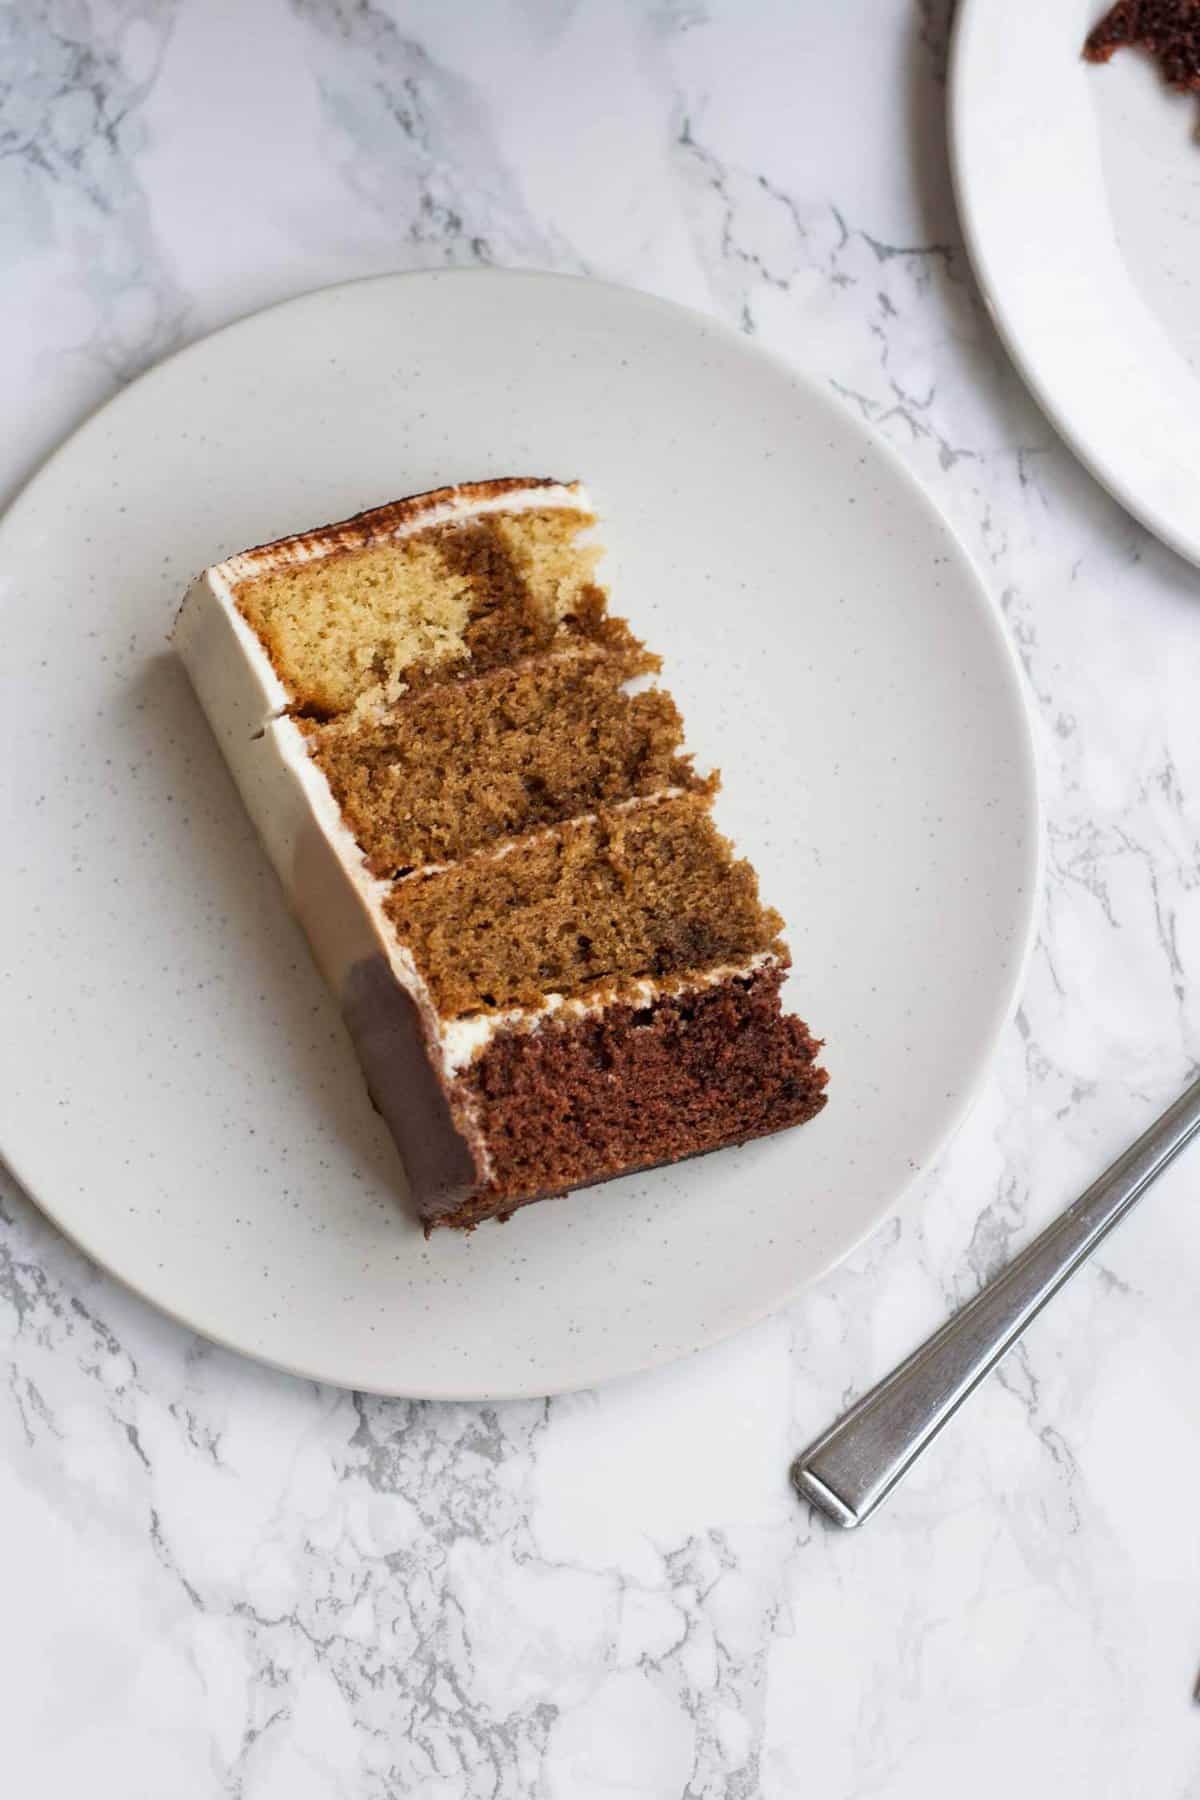 Tiramisu Layer Cake with Ombre Mascarpone Frosting - this decadent tiramisu cake is perfect for coffee addicts - it's light and flavourful and is an ideal birthday cake! | eatloveeats.com